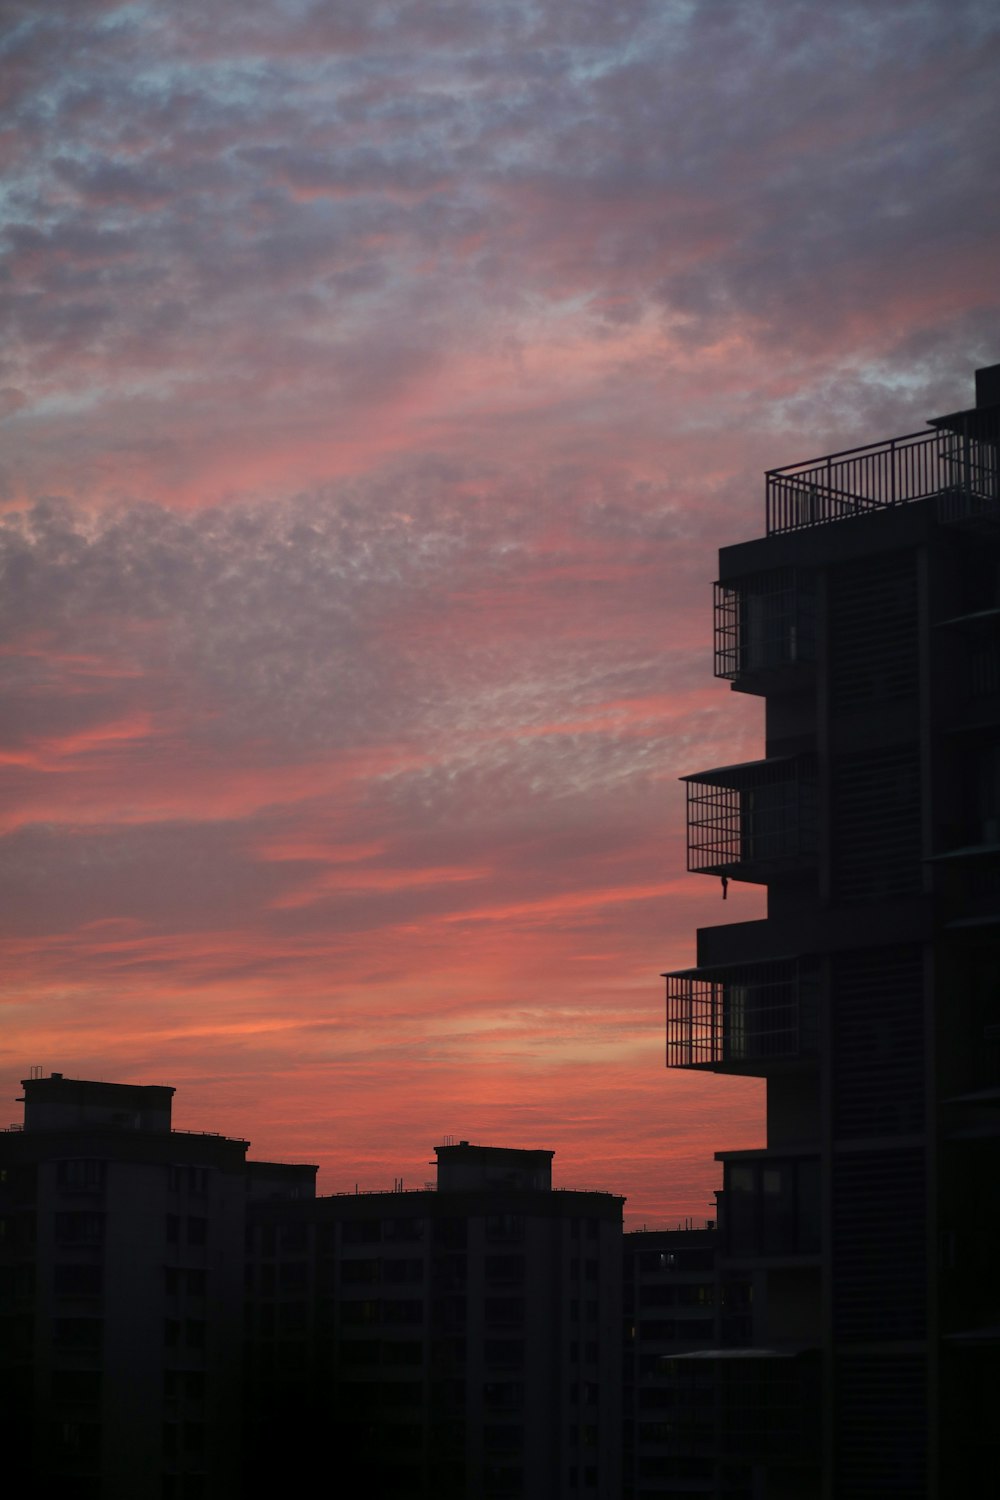 a building with balconies and balconies at sunset